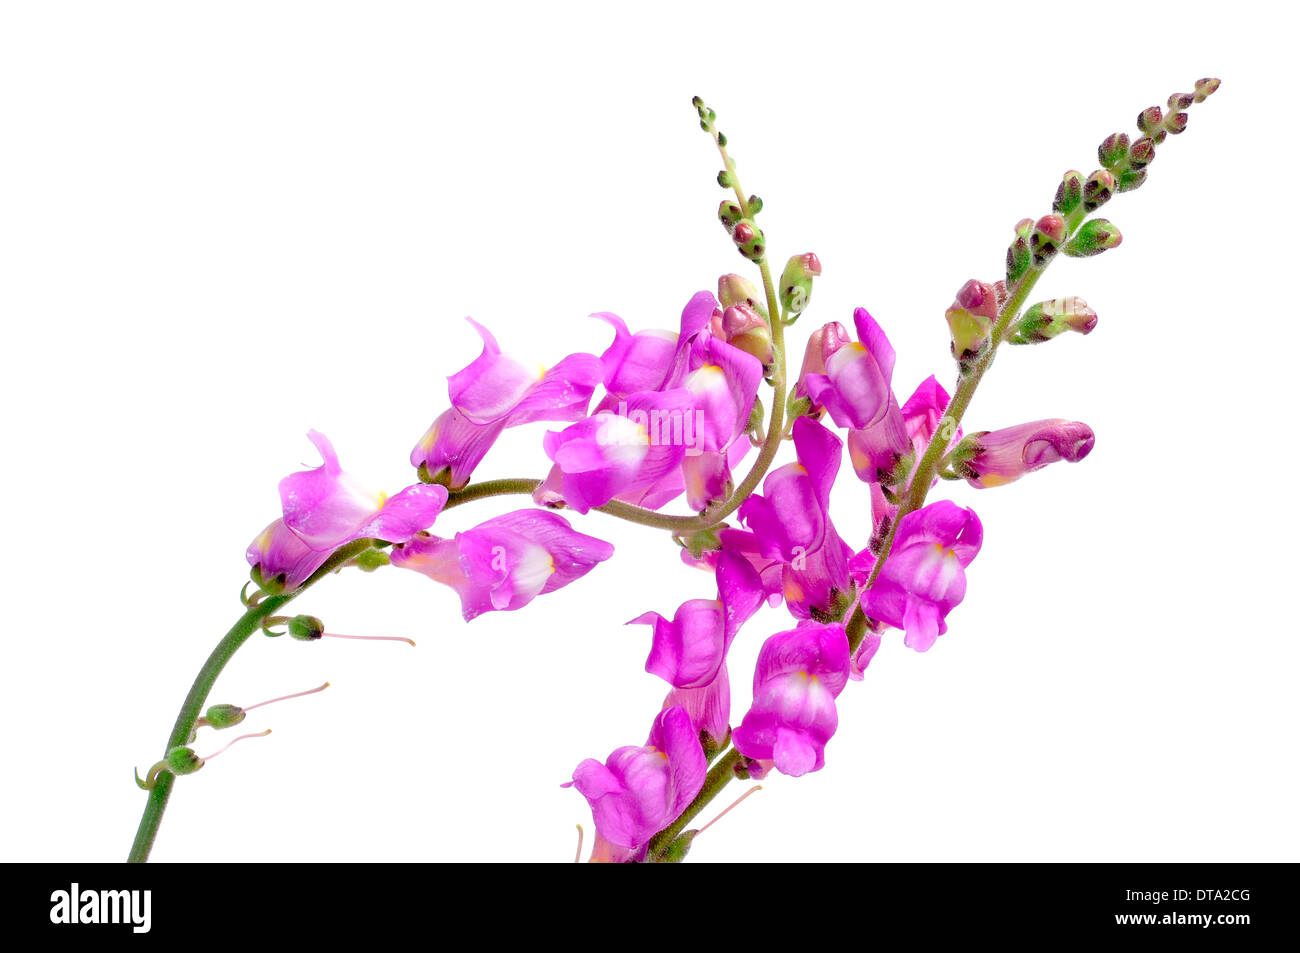 some violet snapdragon flowers on a white background Stock Photo